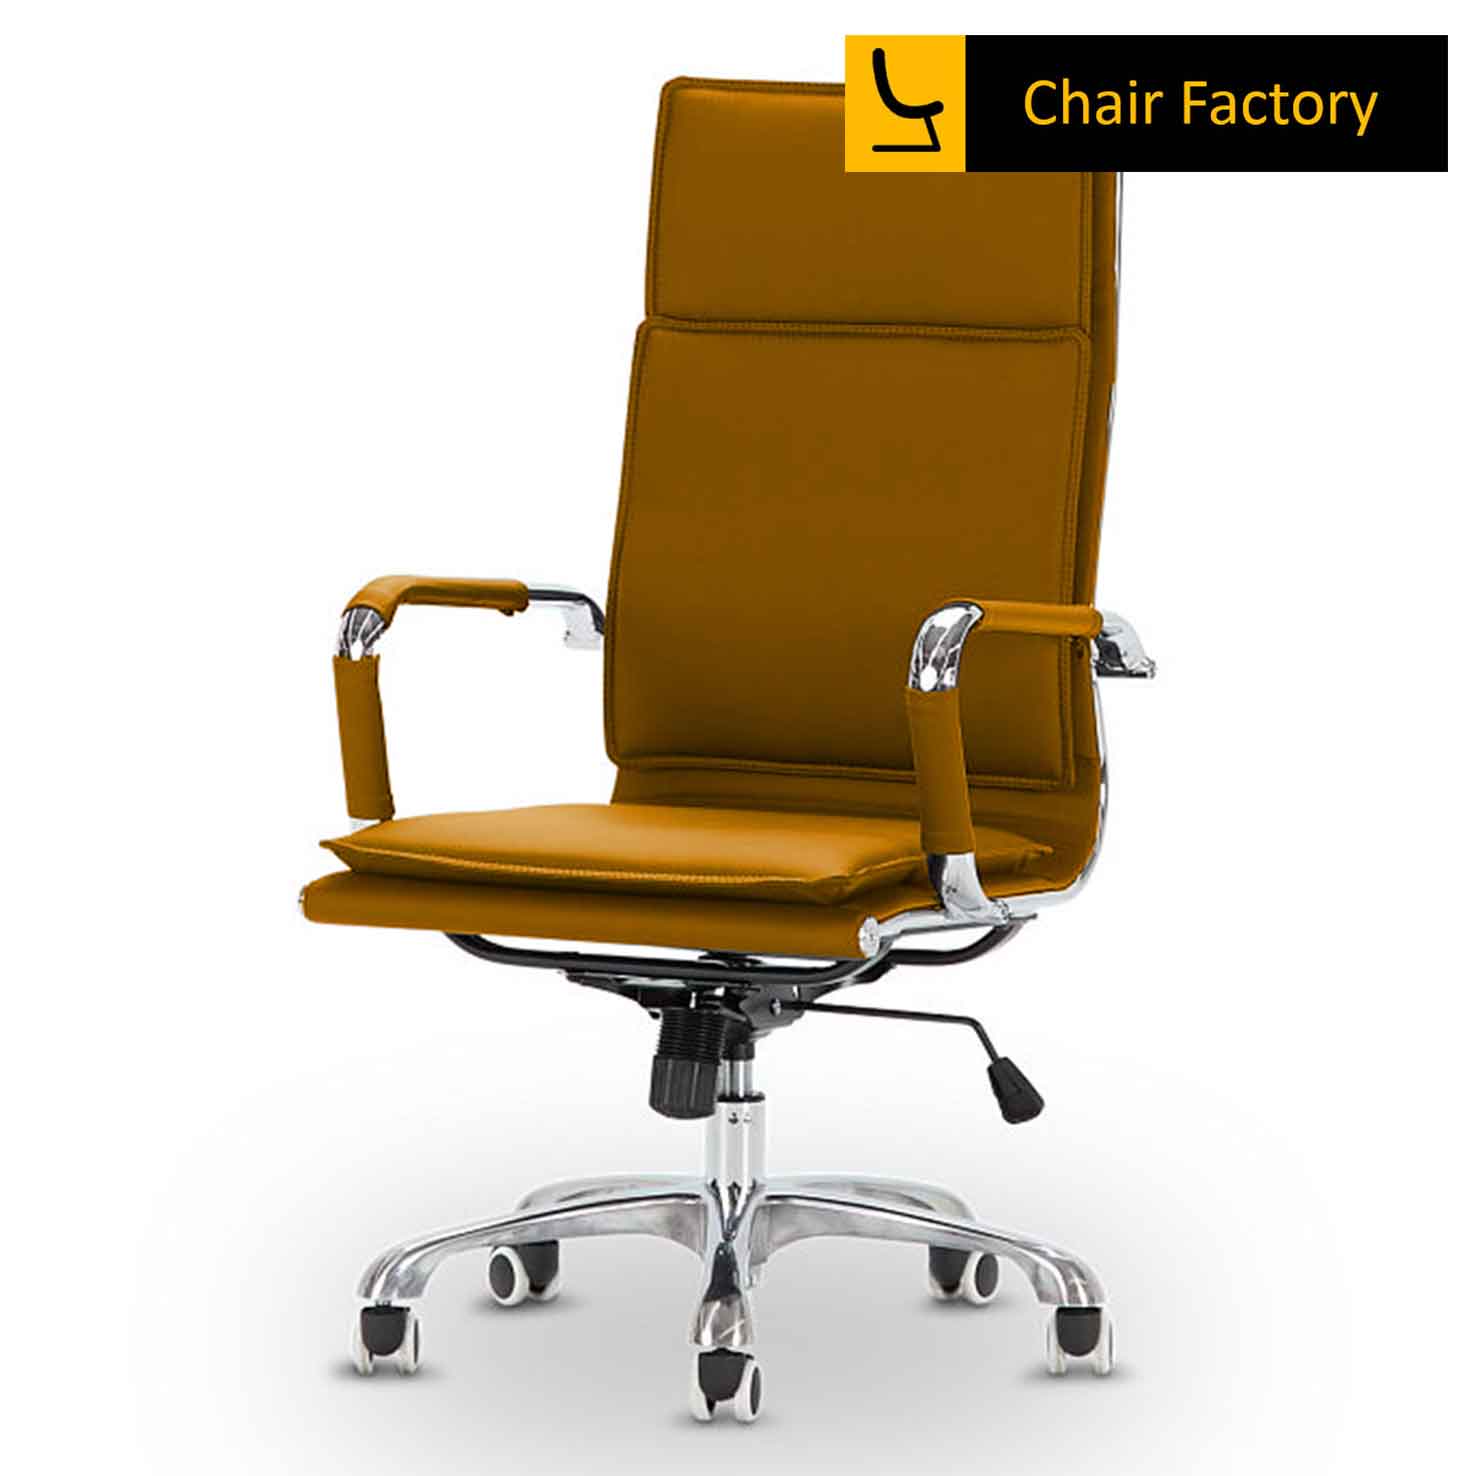 James Double Cushion Mustard High Back Office Chair 